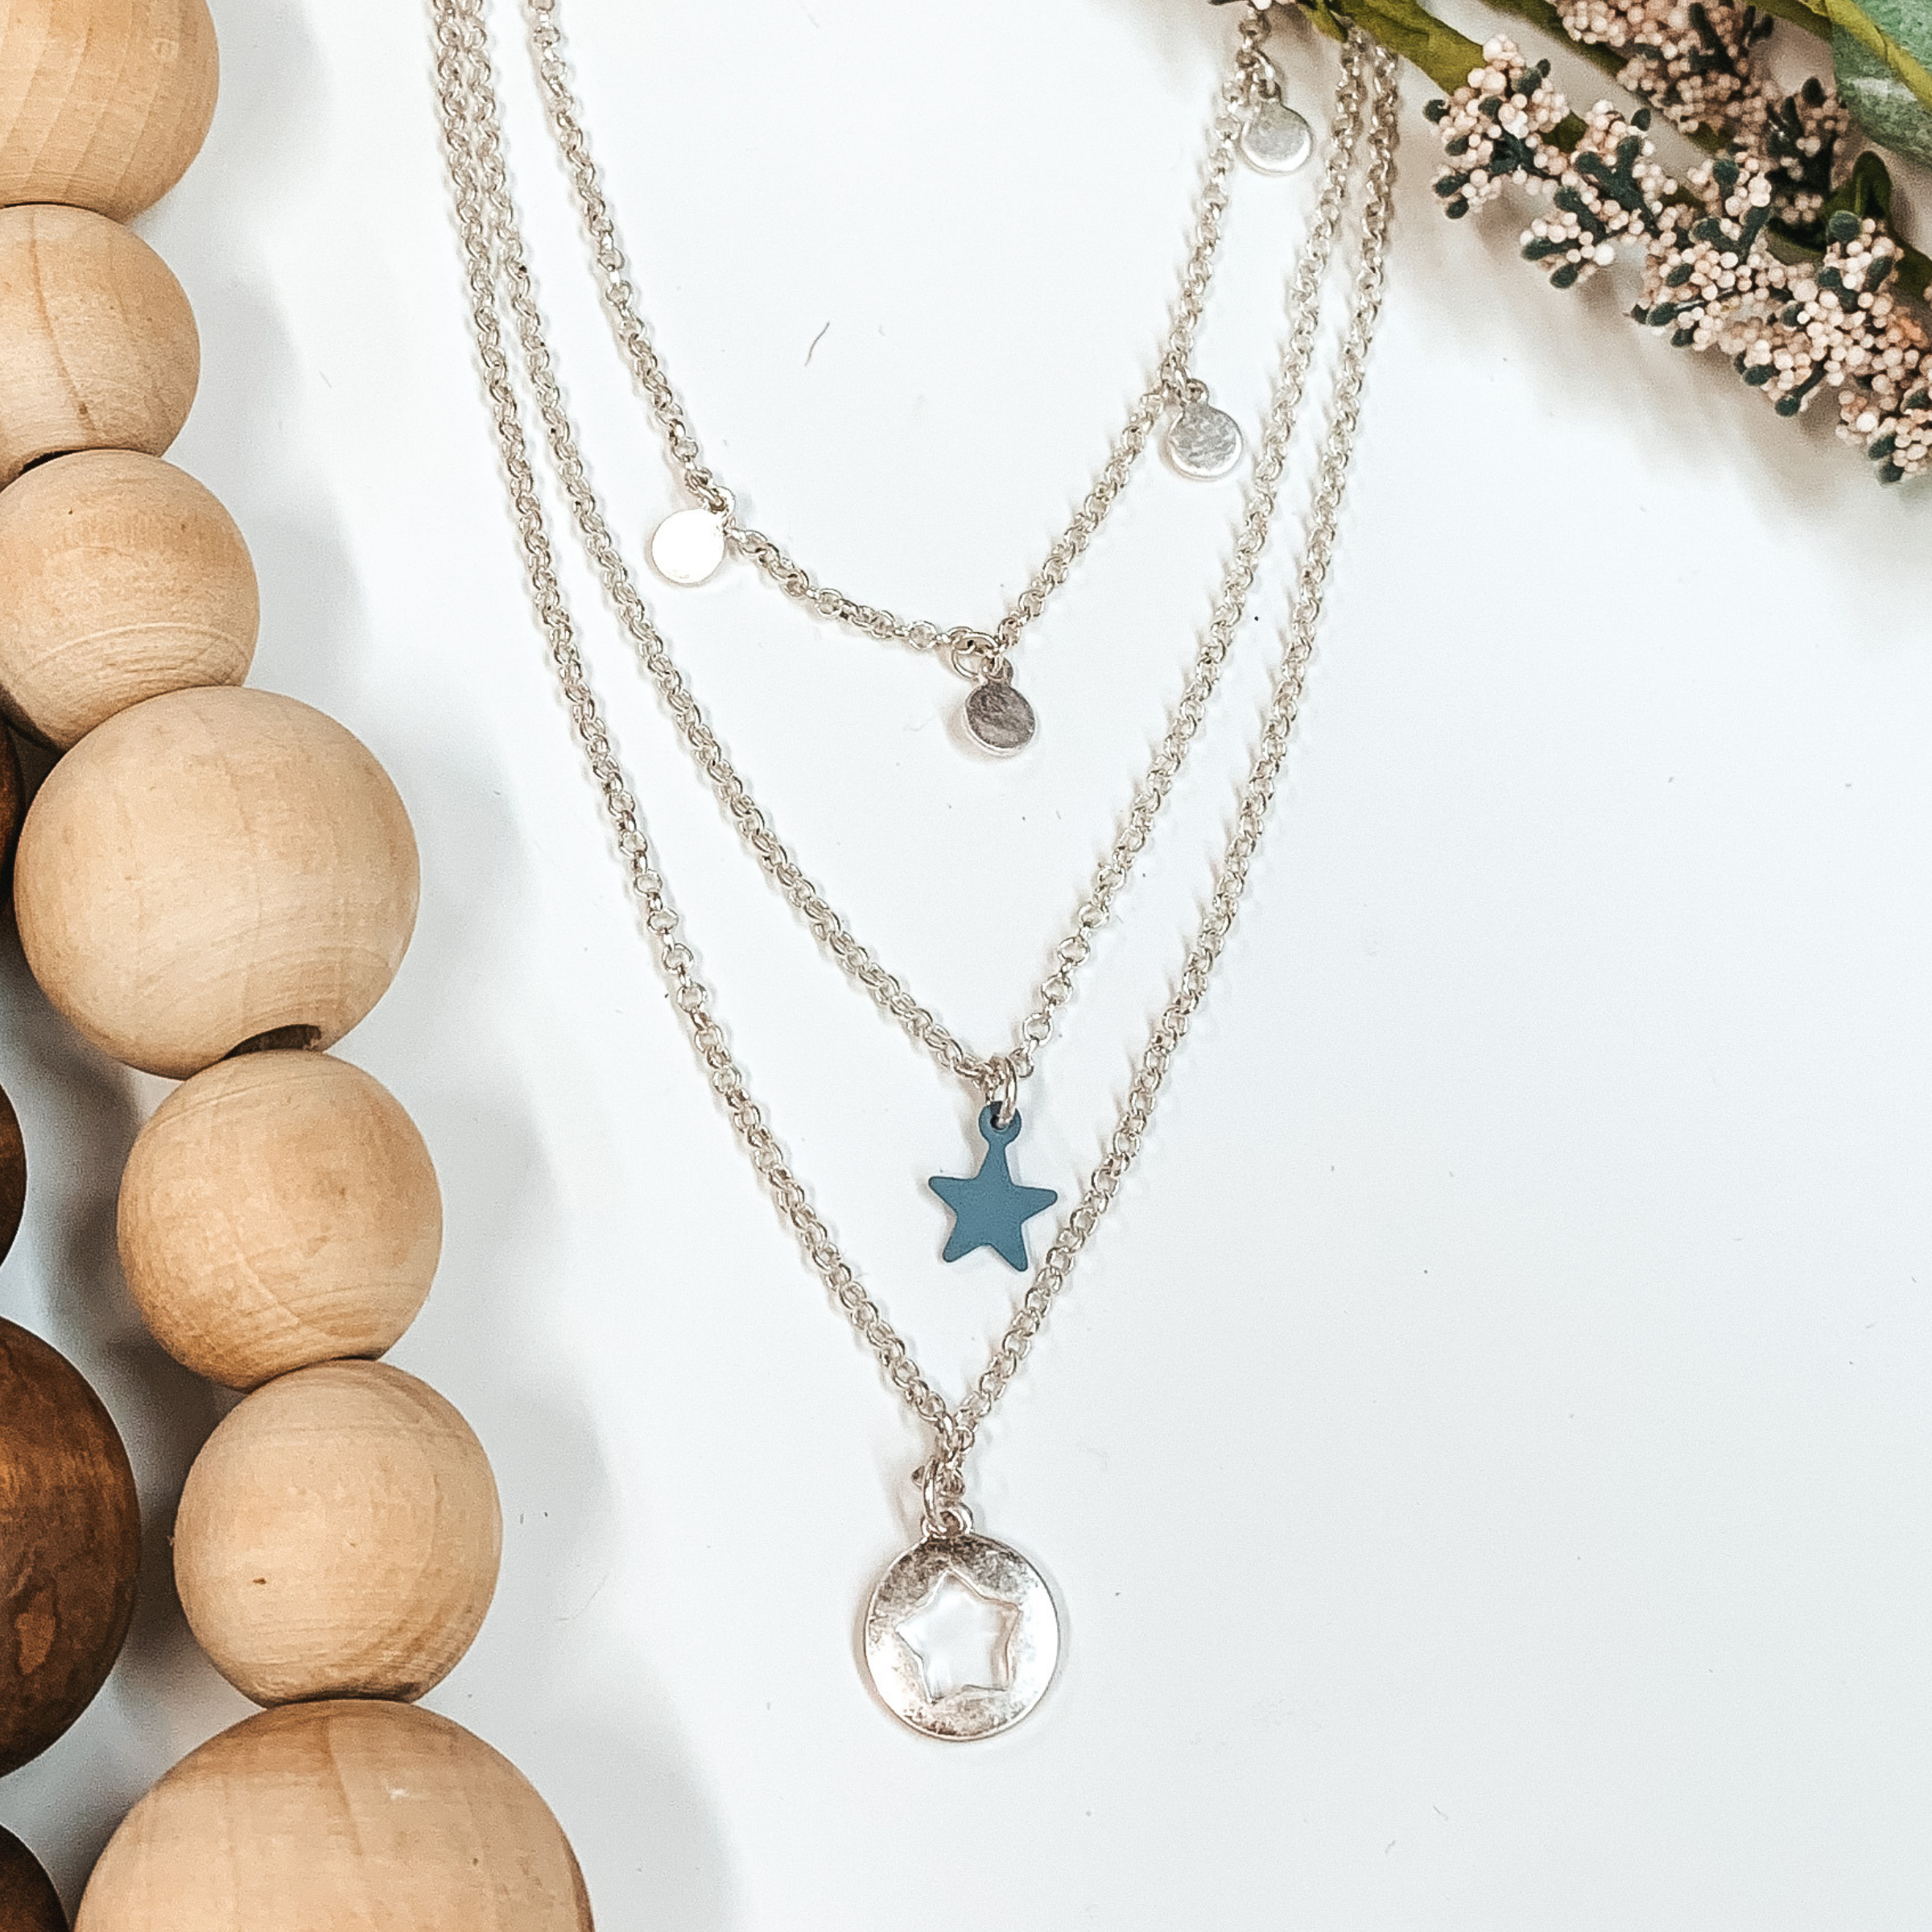 First Star Necklace Set in Silver/Blue - Giddy Up Glamour Boutique